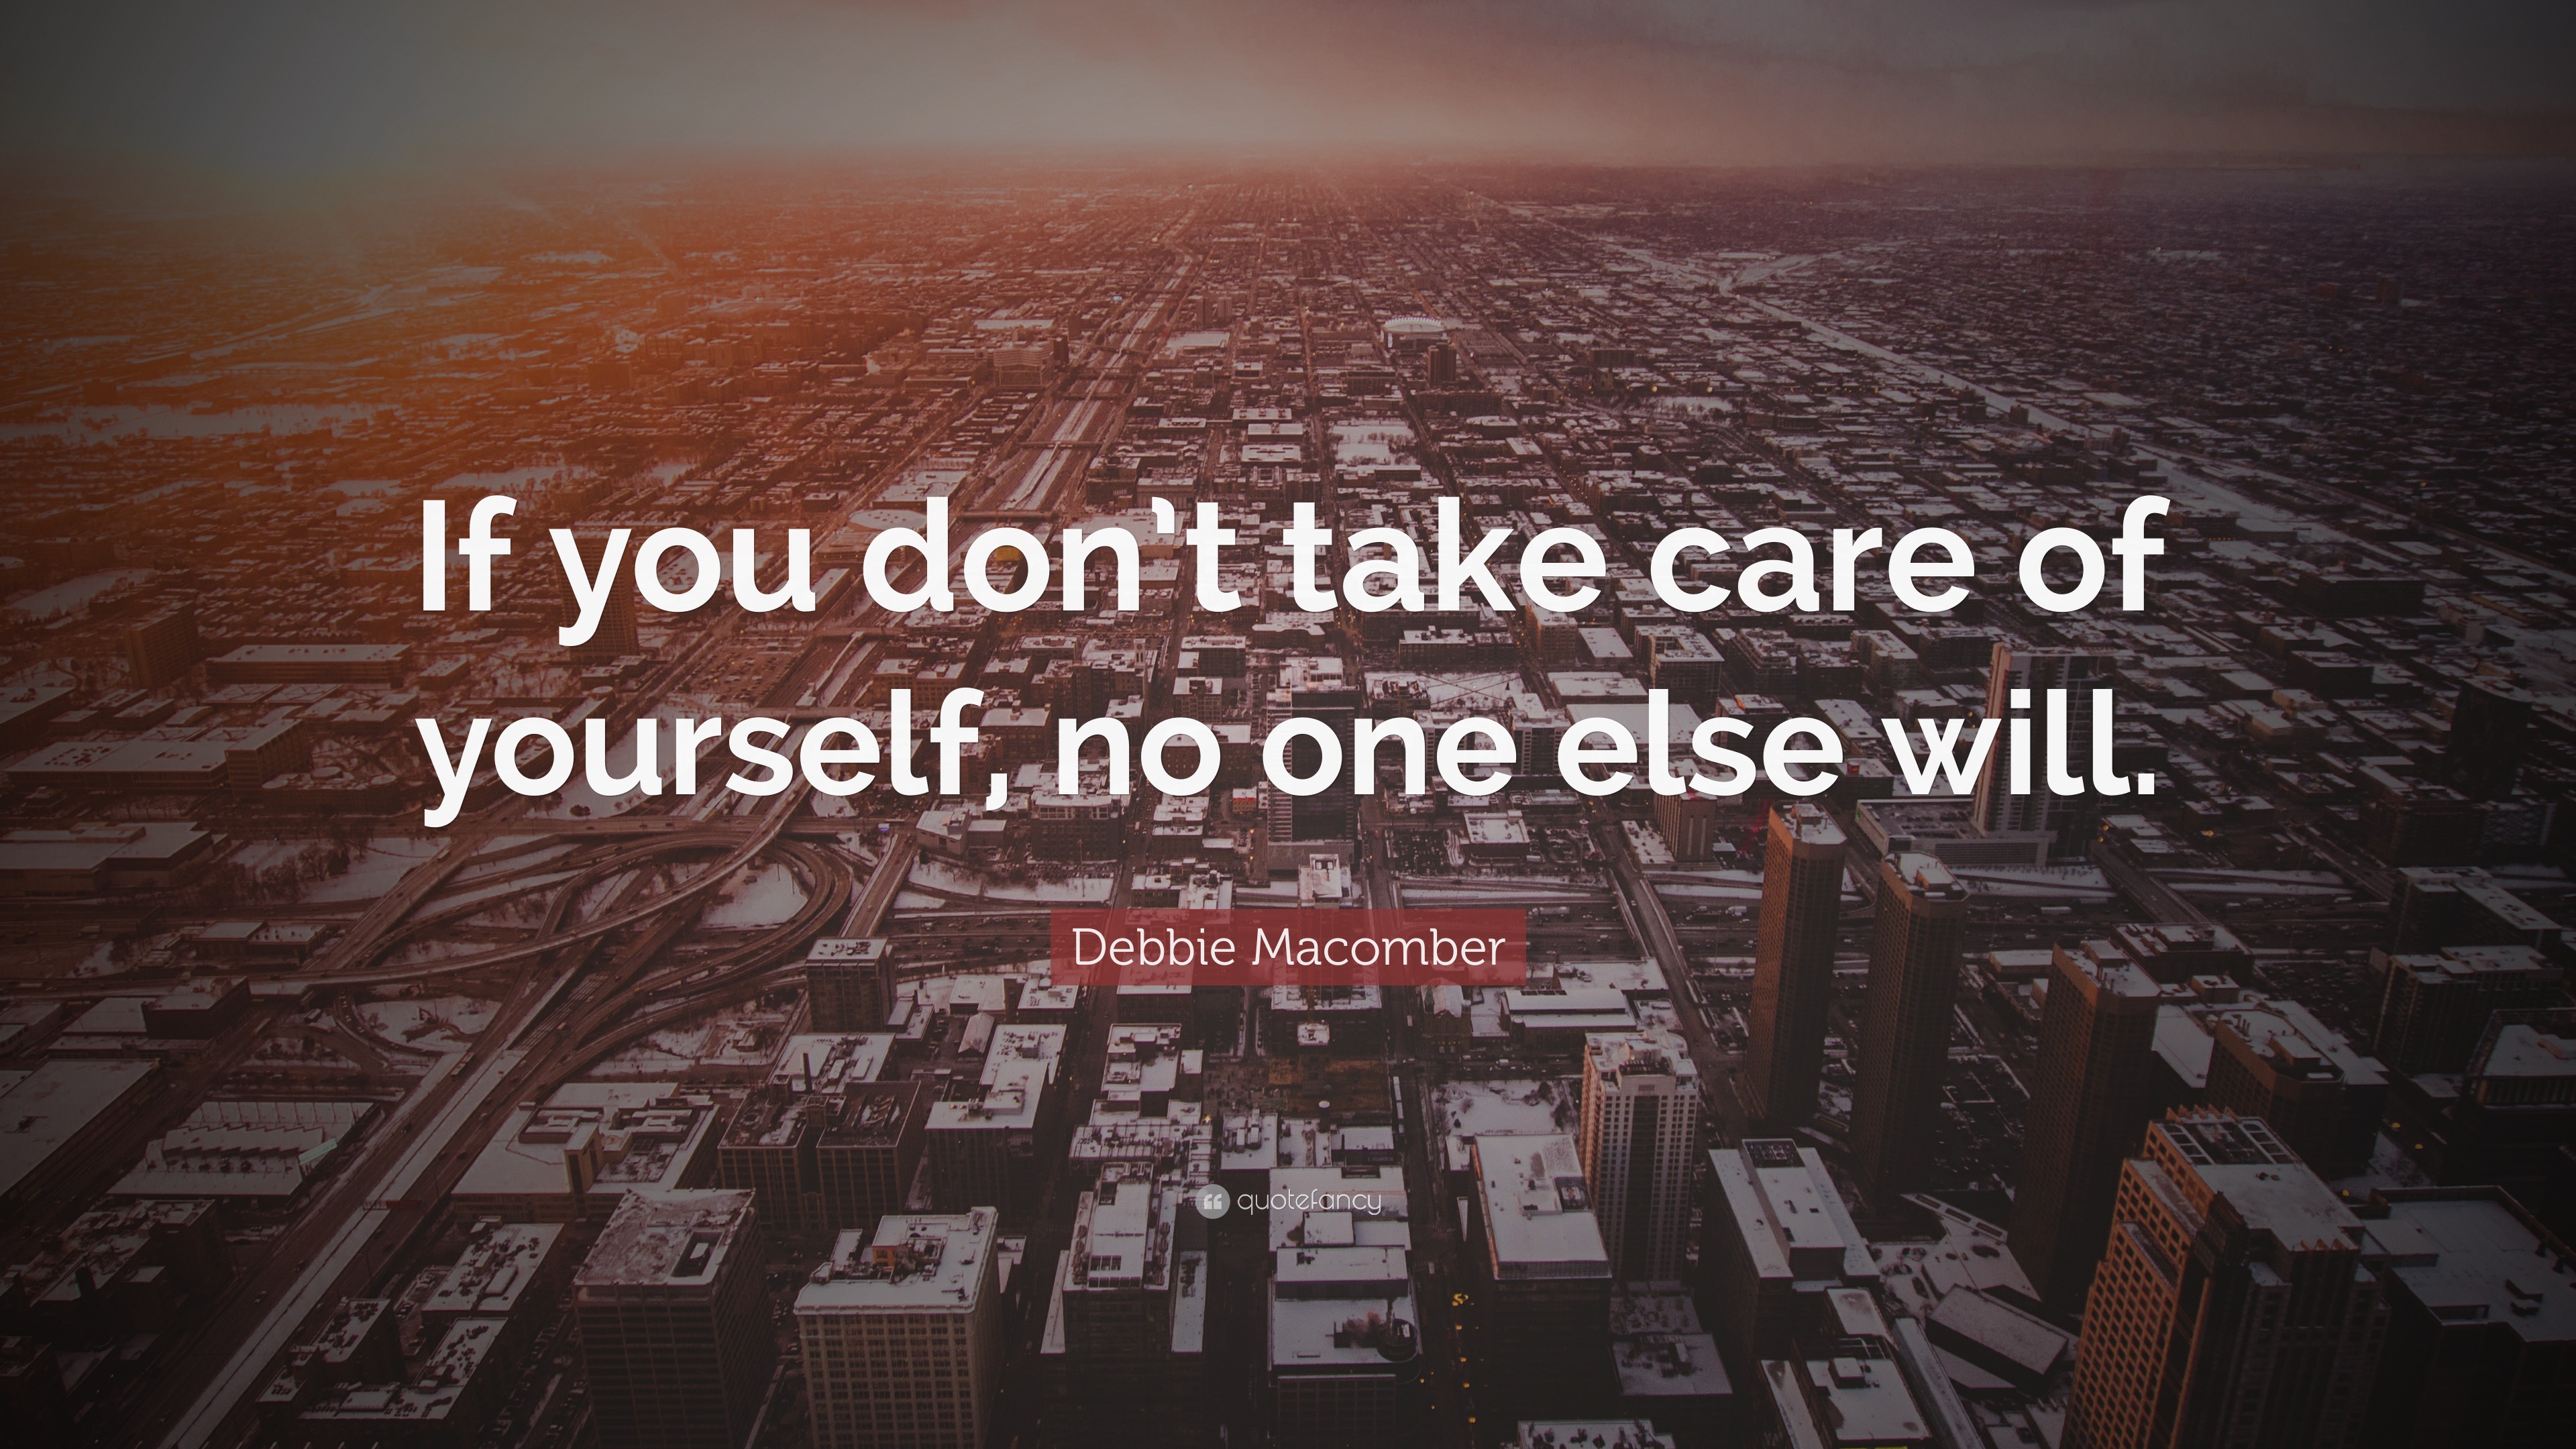 If you don't take care of yourself, nobody else will